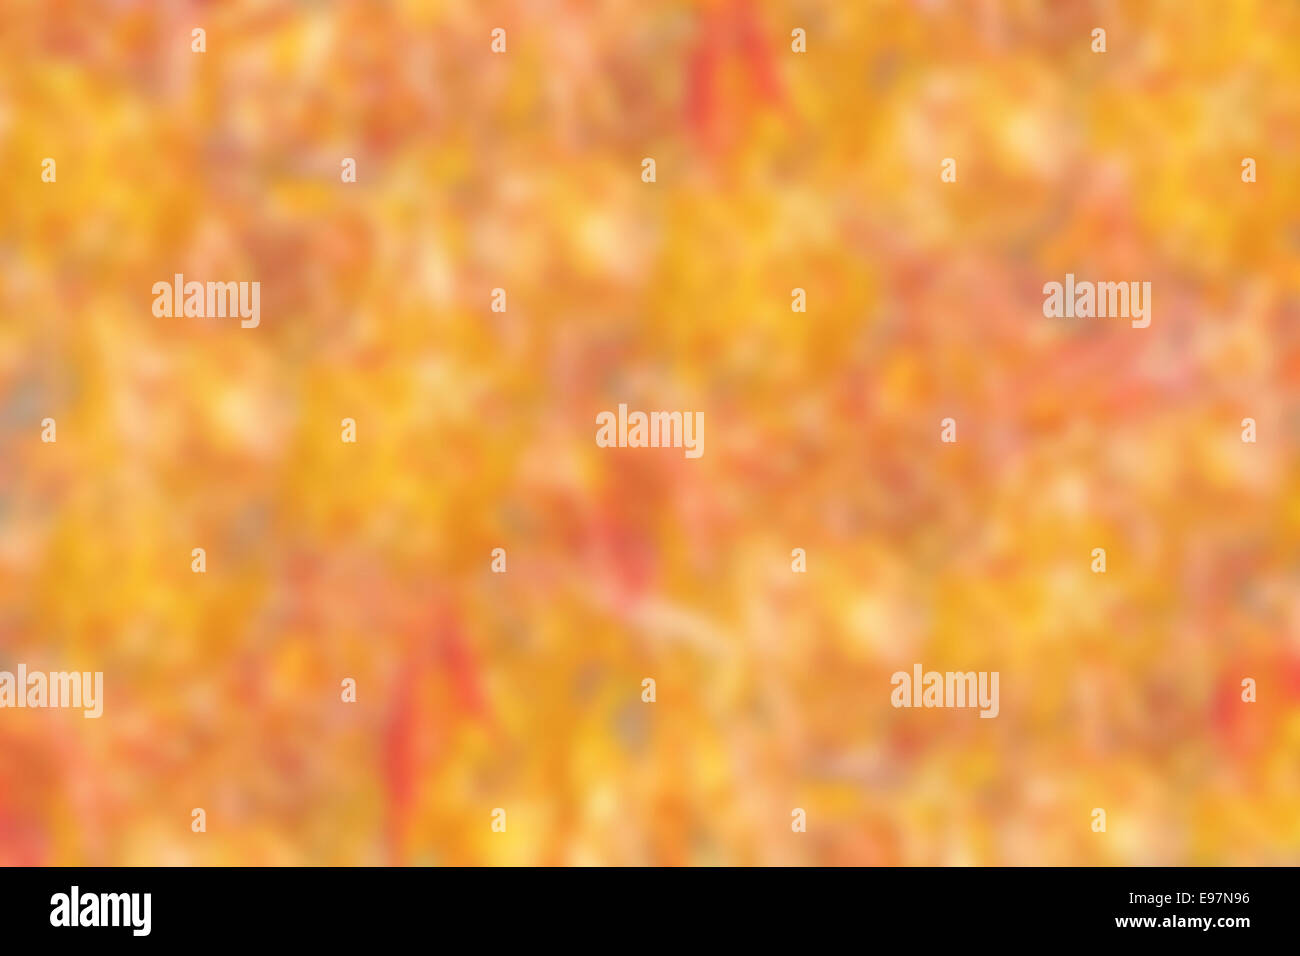 Blurred pastel abstract background, orange, yellow and red colors Stock Photo